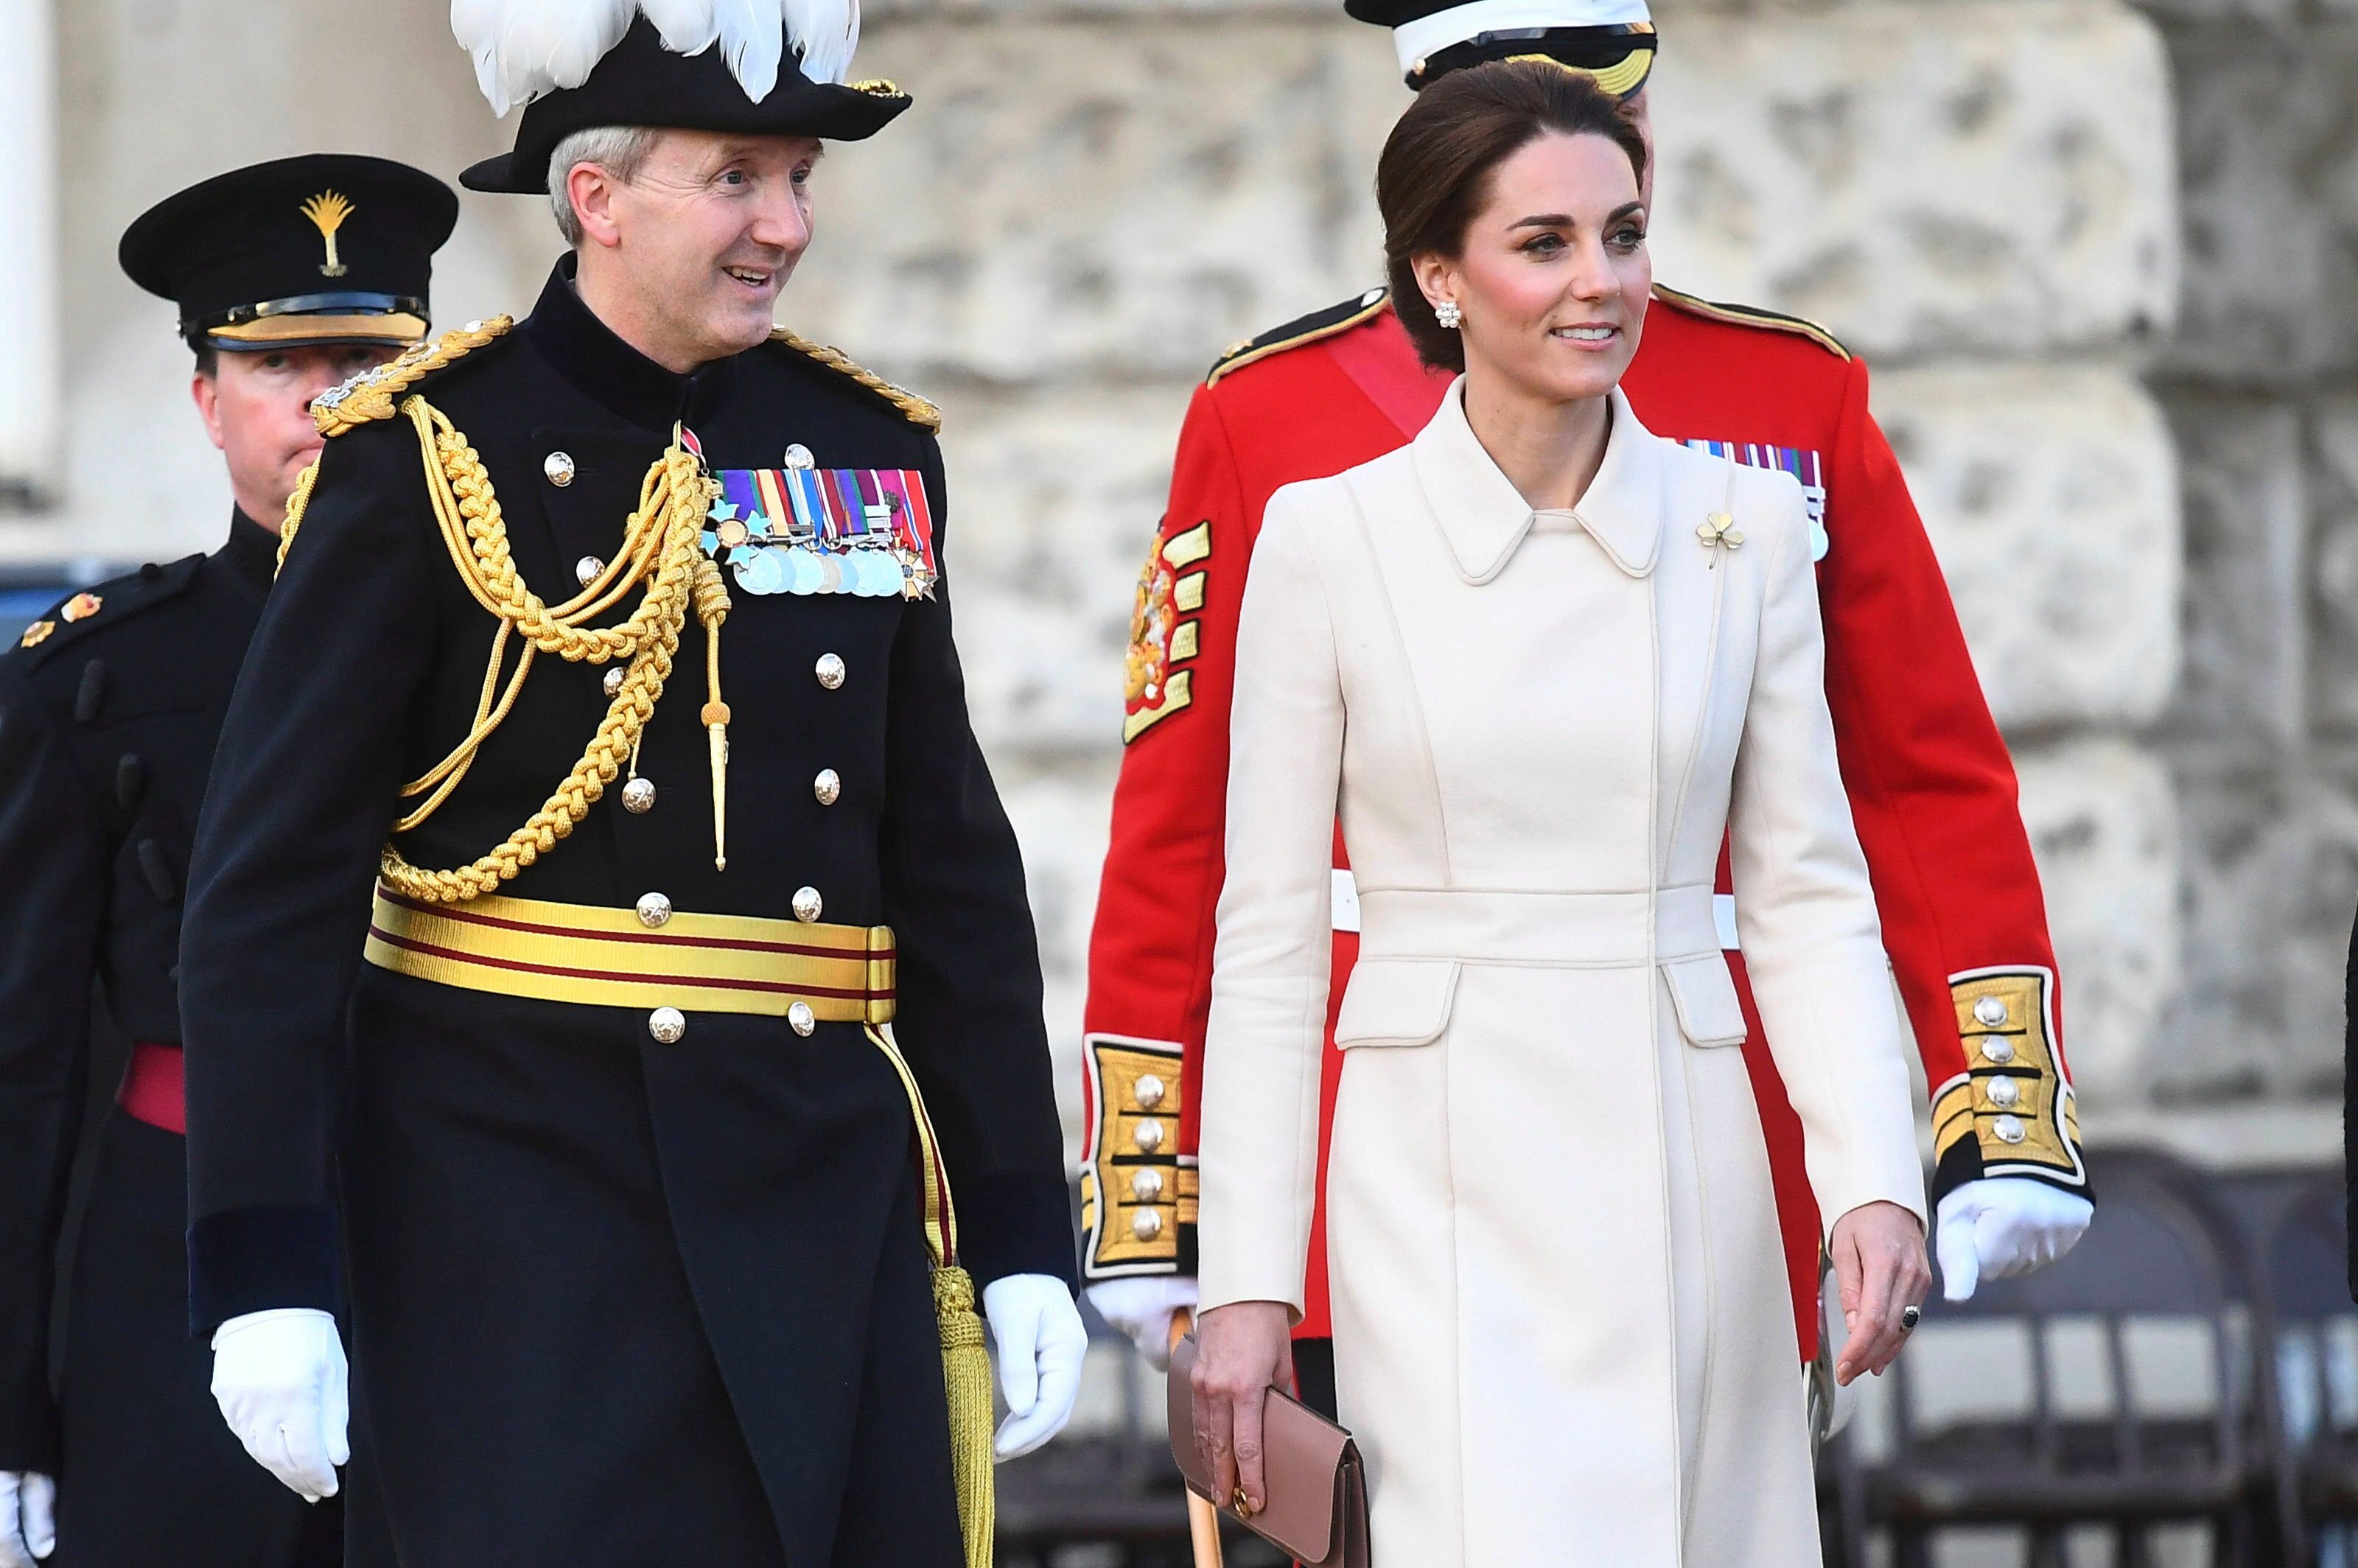 Kate Middleton Steps Out To Honor Troops At Military Parade Fame10